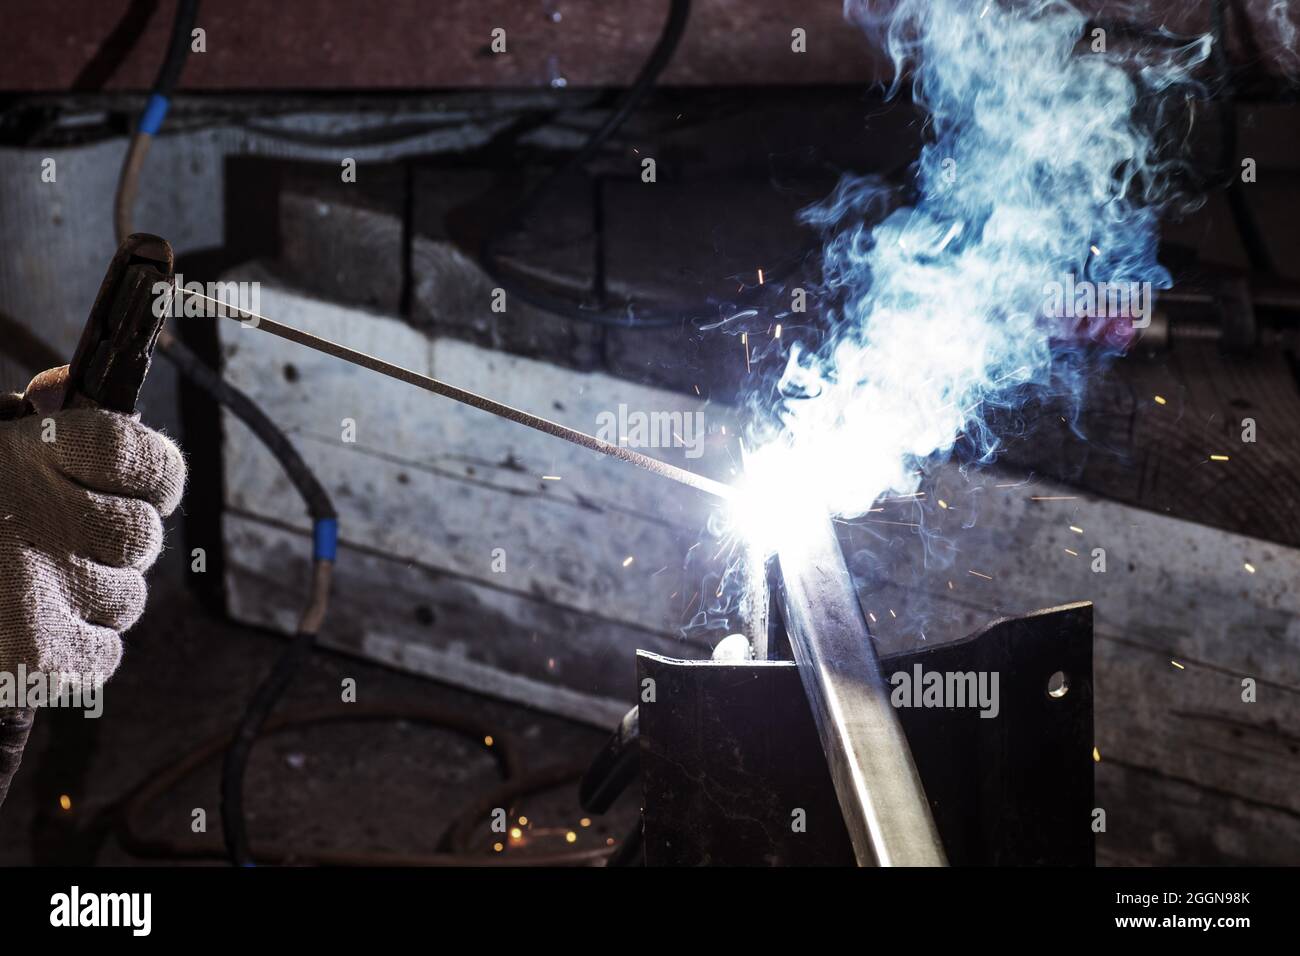 The concept of shielded metal arc welding, flame welding, building construction in metal structures, using heat to melt the parts together Stock Photo